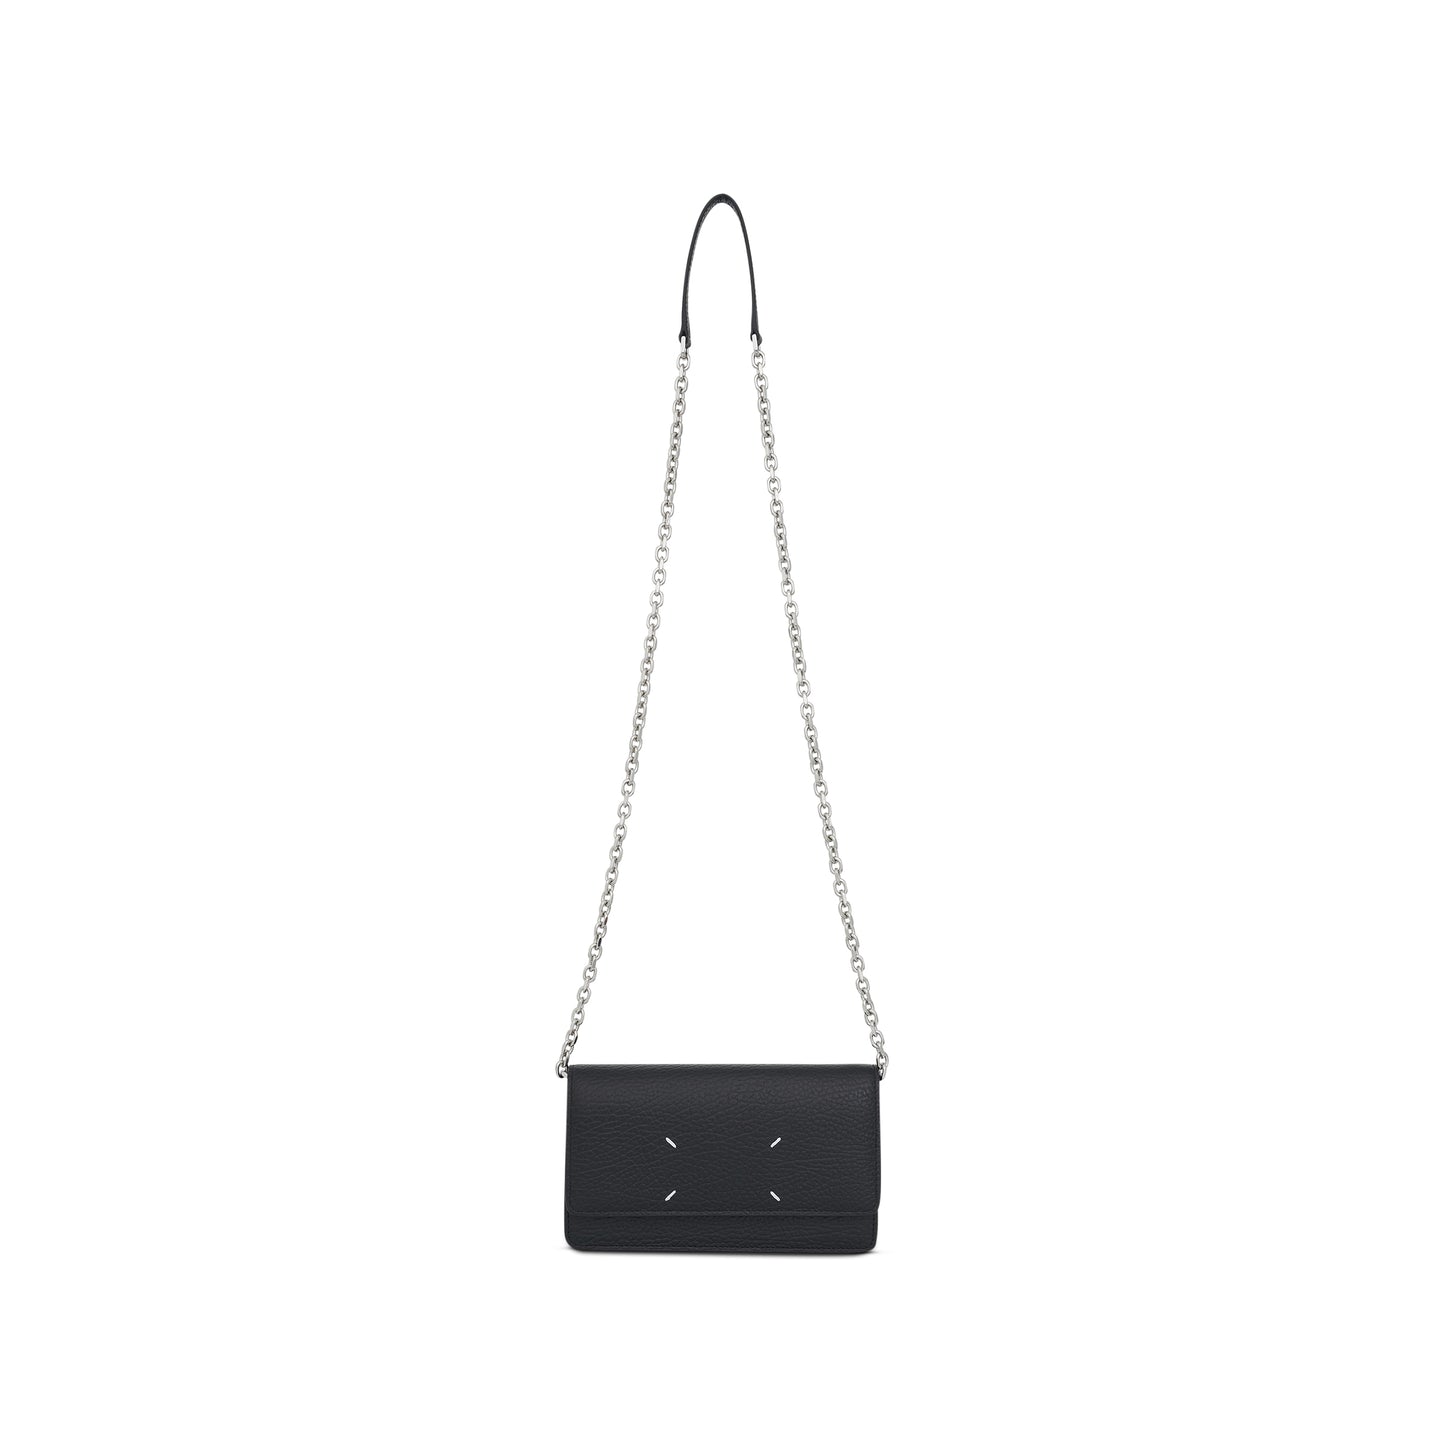 Four Stitches Chain Wallet in Black